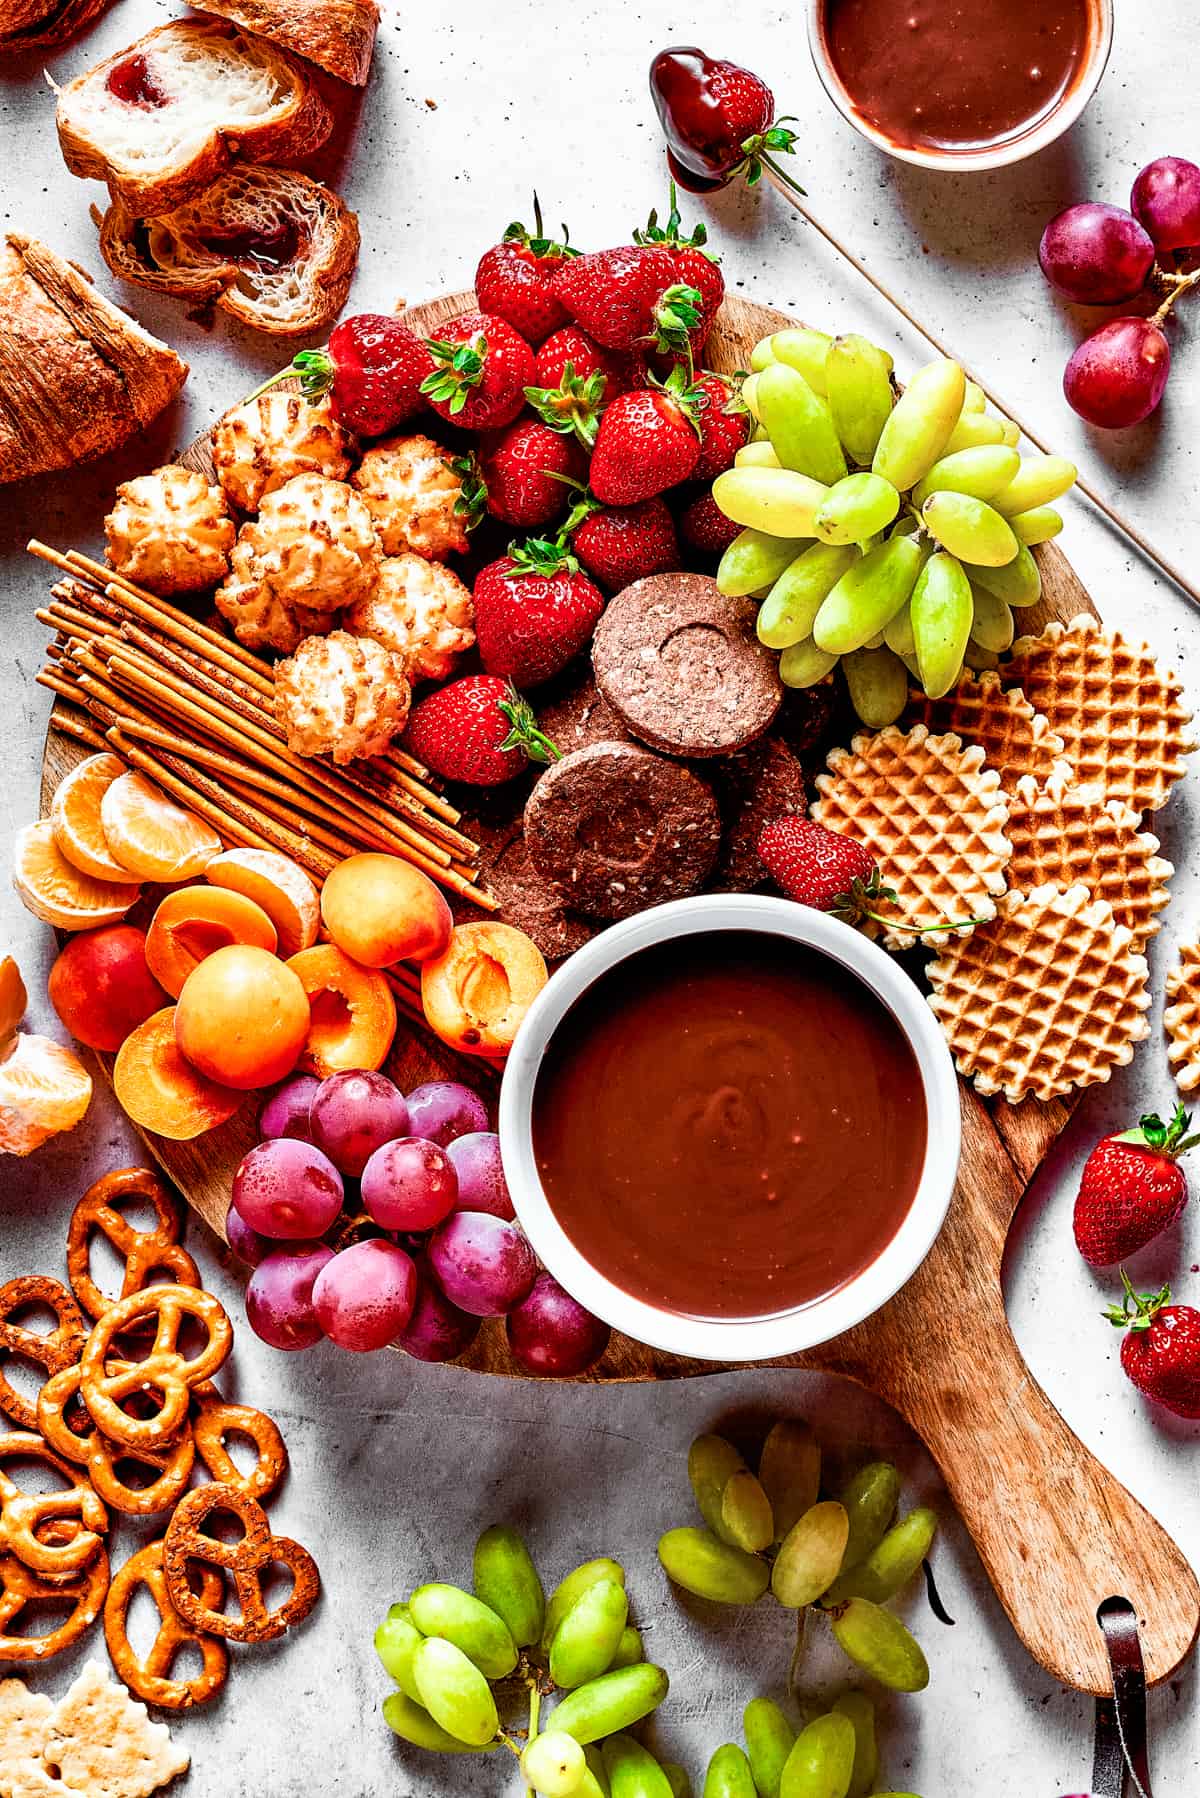 A dessert board with fruit, waffles, pretzels, and with a bowl of fondue in the center.